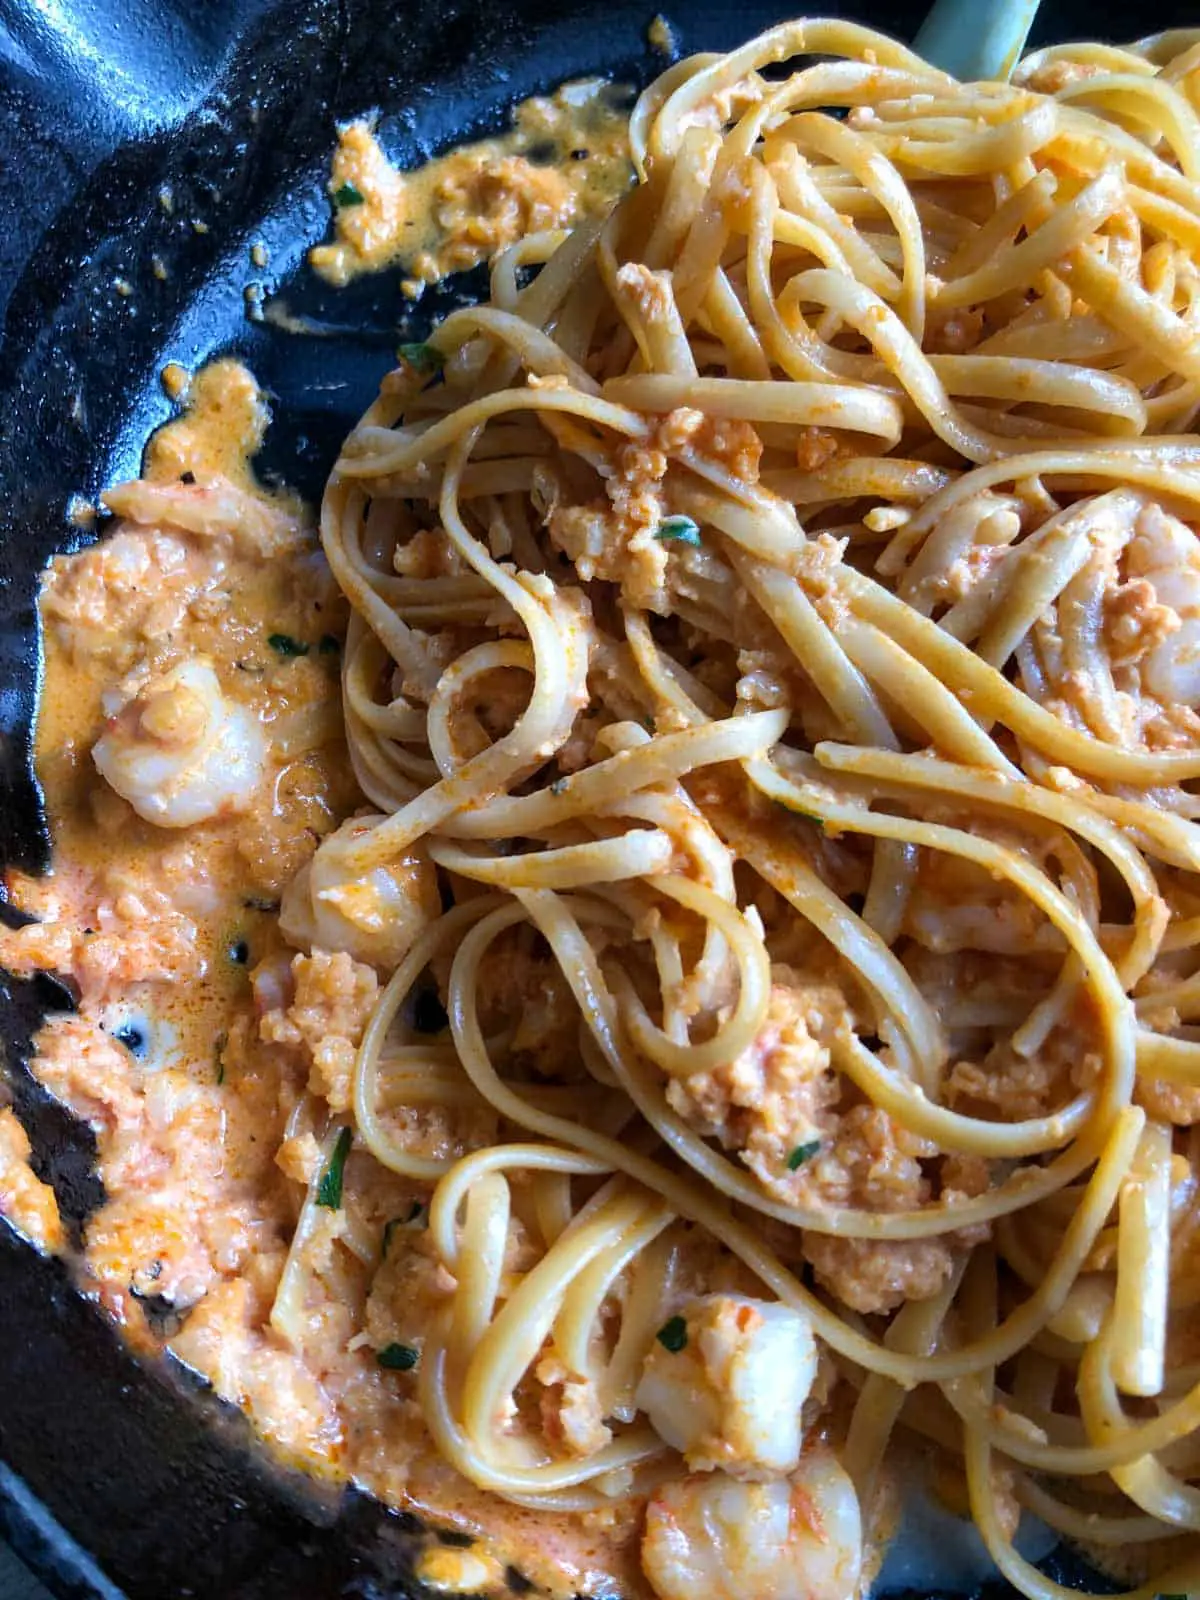 Linguine with shrimp in a pink sauce in a cast iron skillet